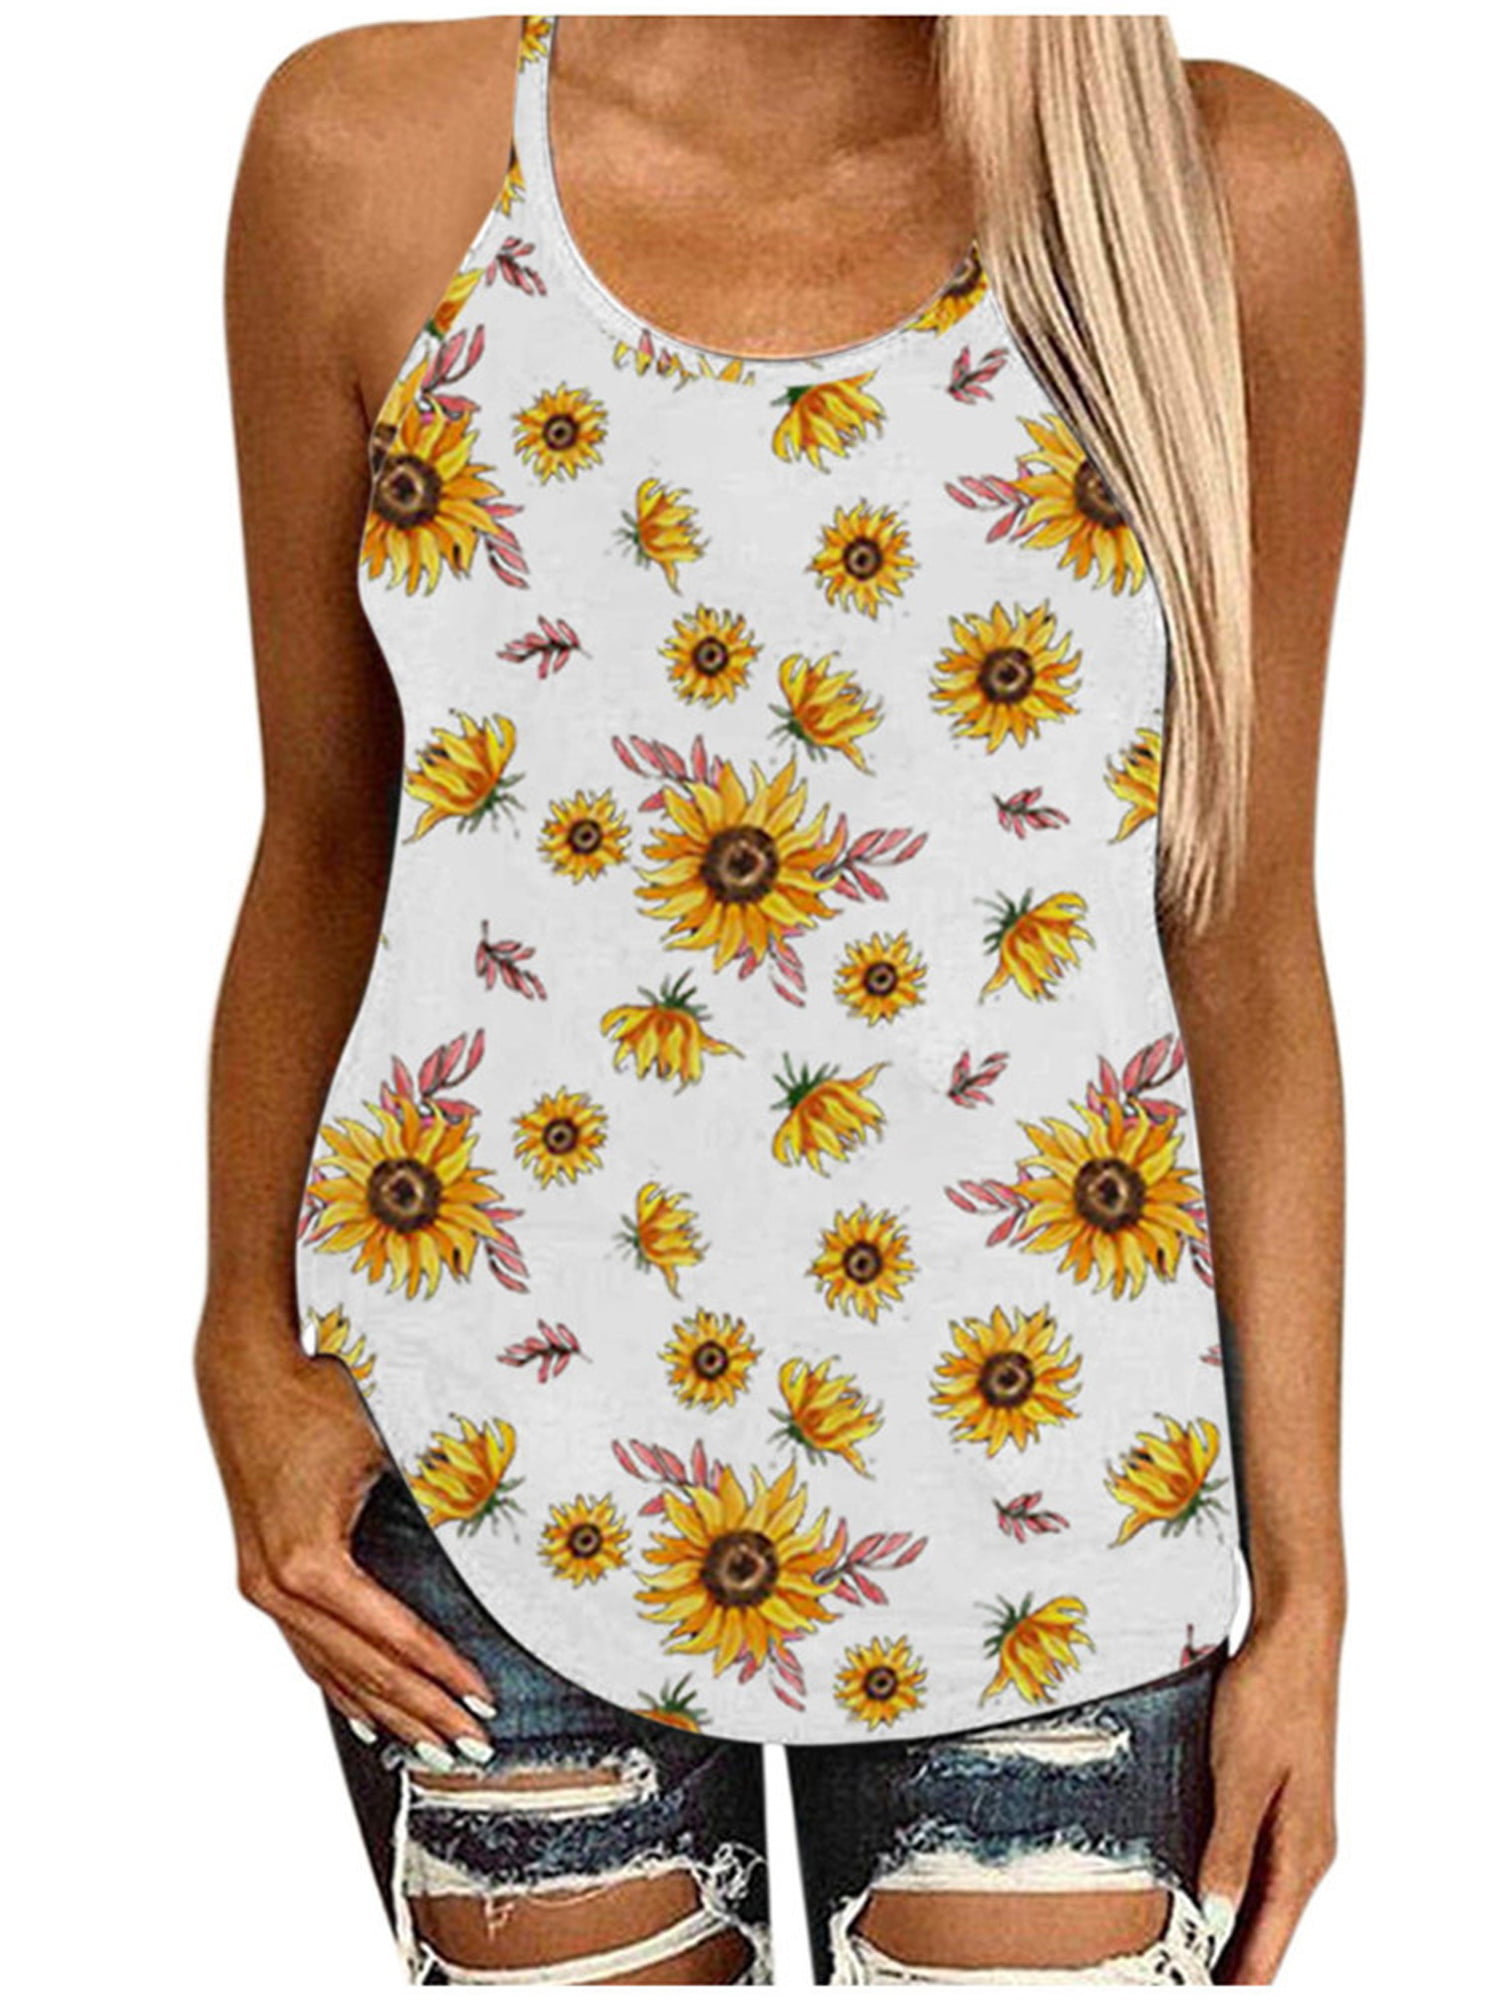 Sunflower Tank Tops for Women Summer Criss Cross Casual Backless Spaghetti Strap Shirts Strappy Sleeveless T-Shirt